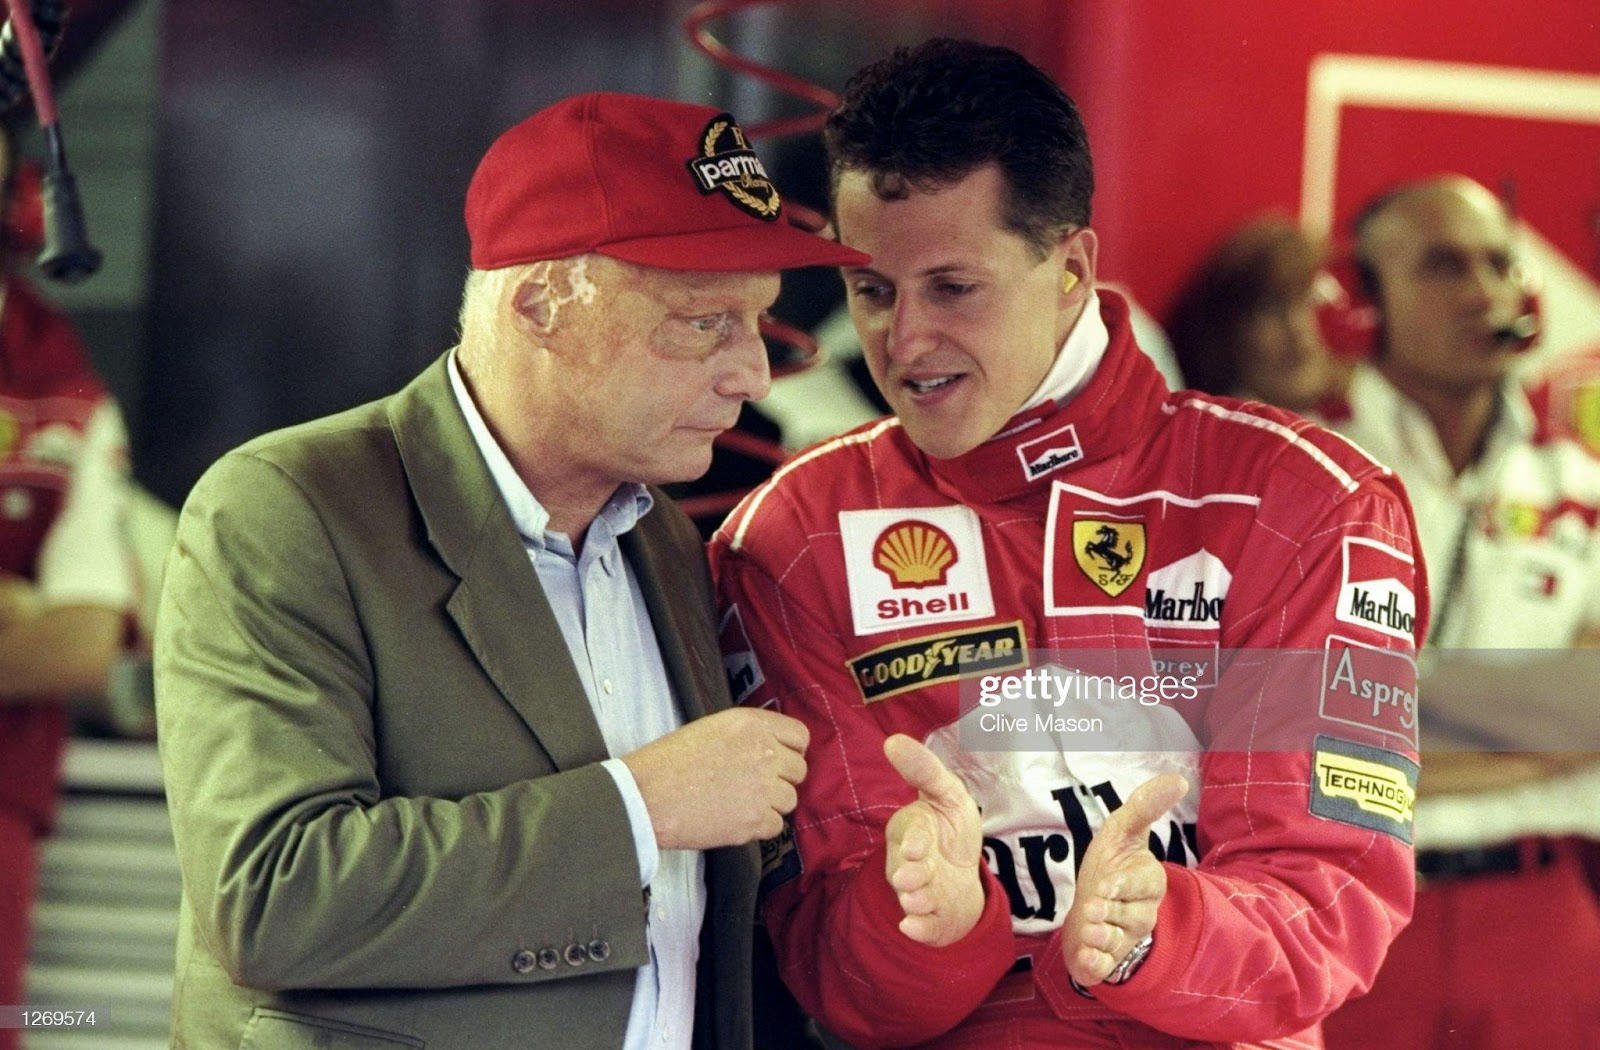 12 Sep 1998: Niki Lauda and Michael Schumacher during qualifying for the Italian Grand Prix at Monza, Italy. 